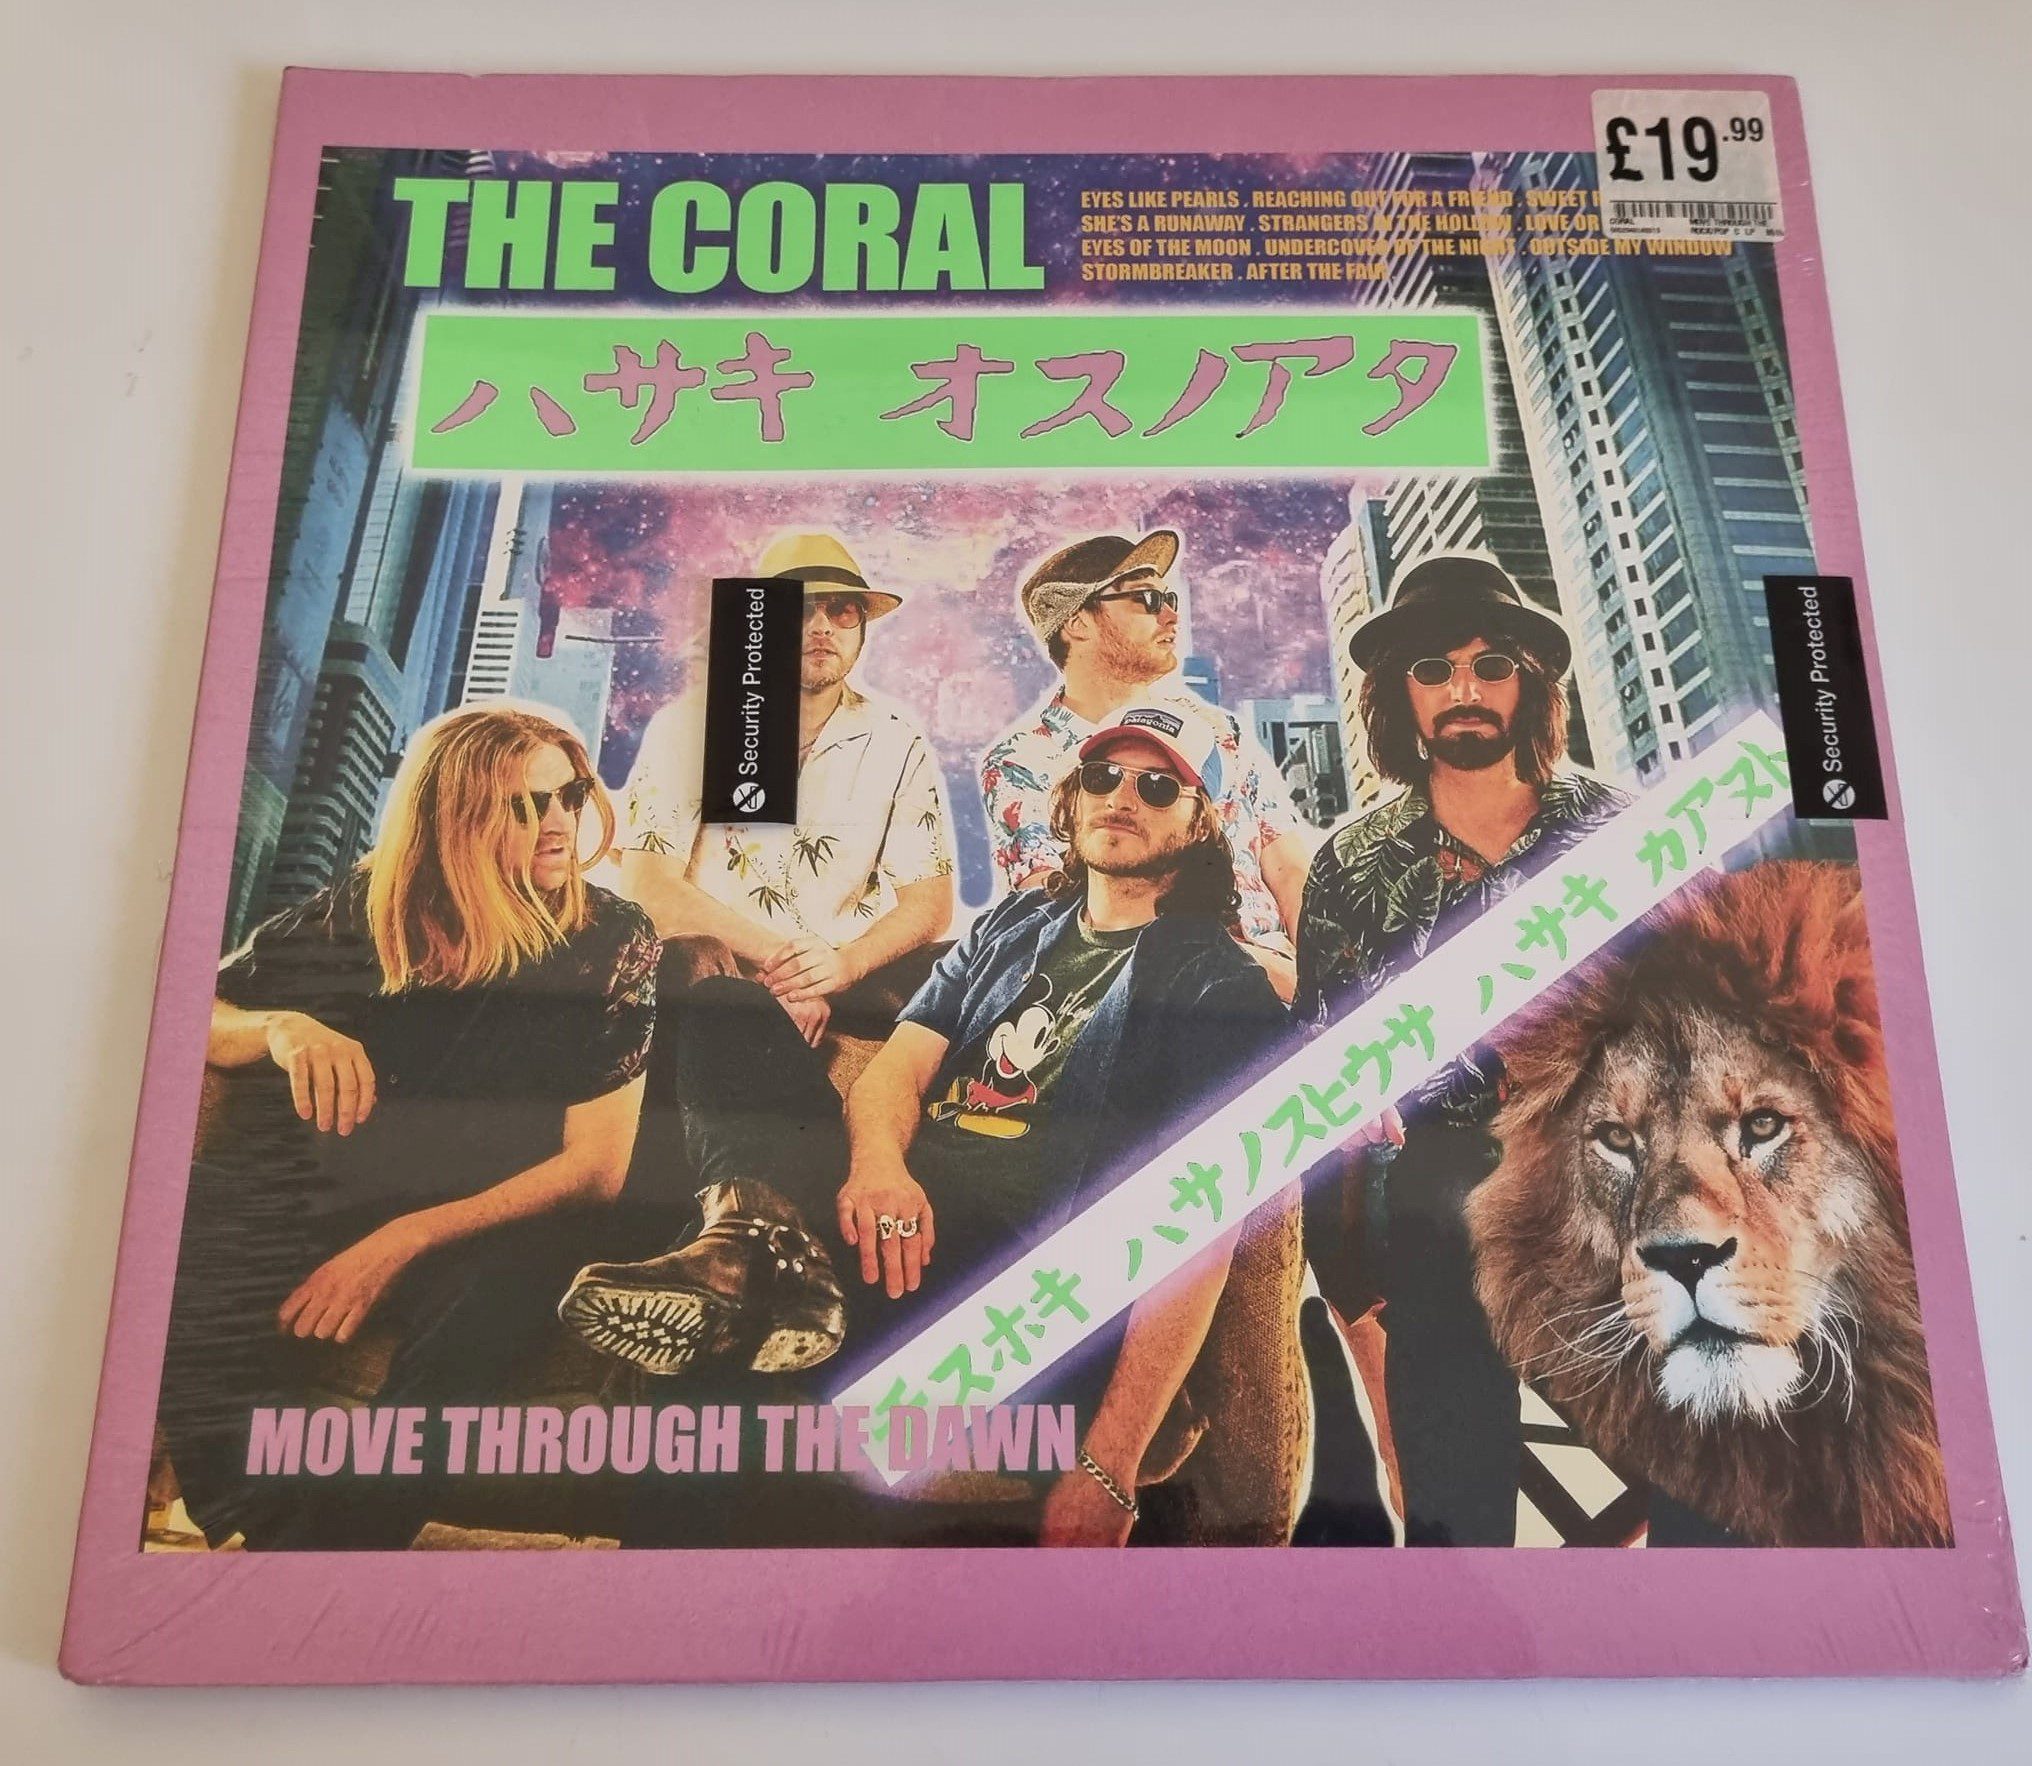 Buy this rare Coral record by clicking here